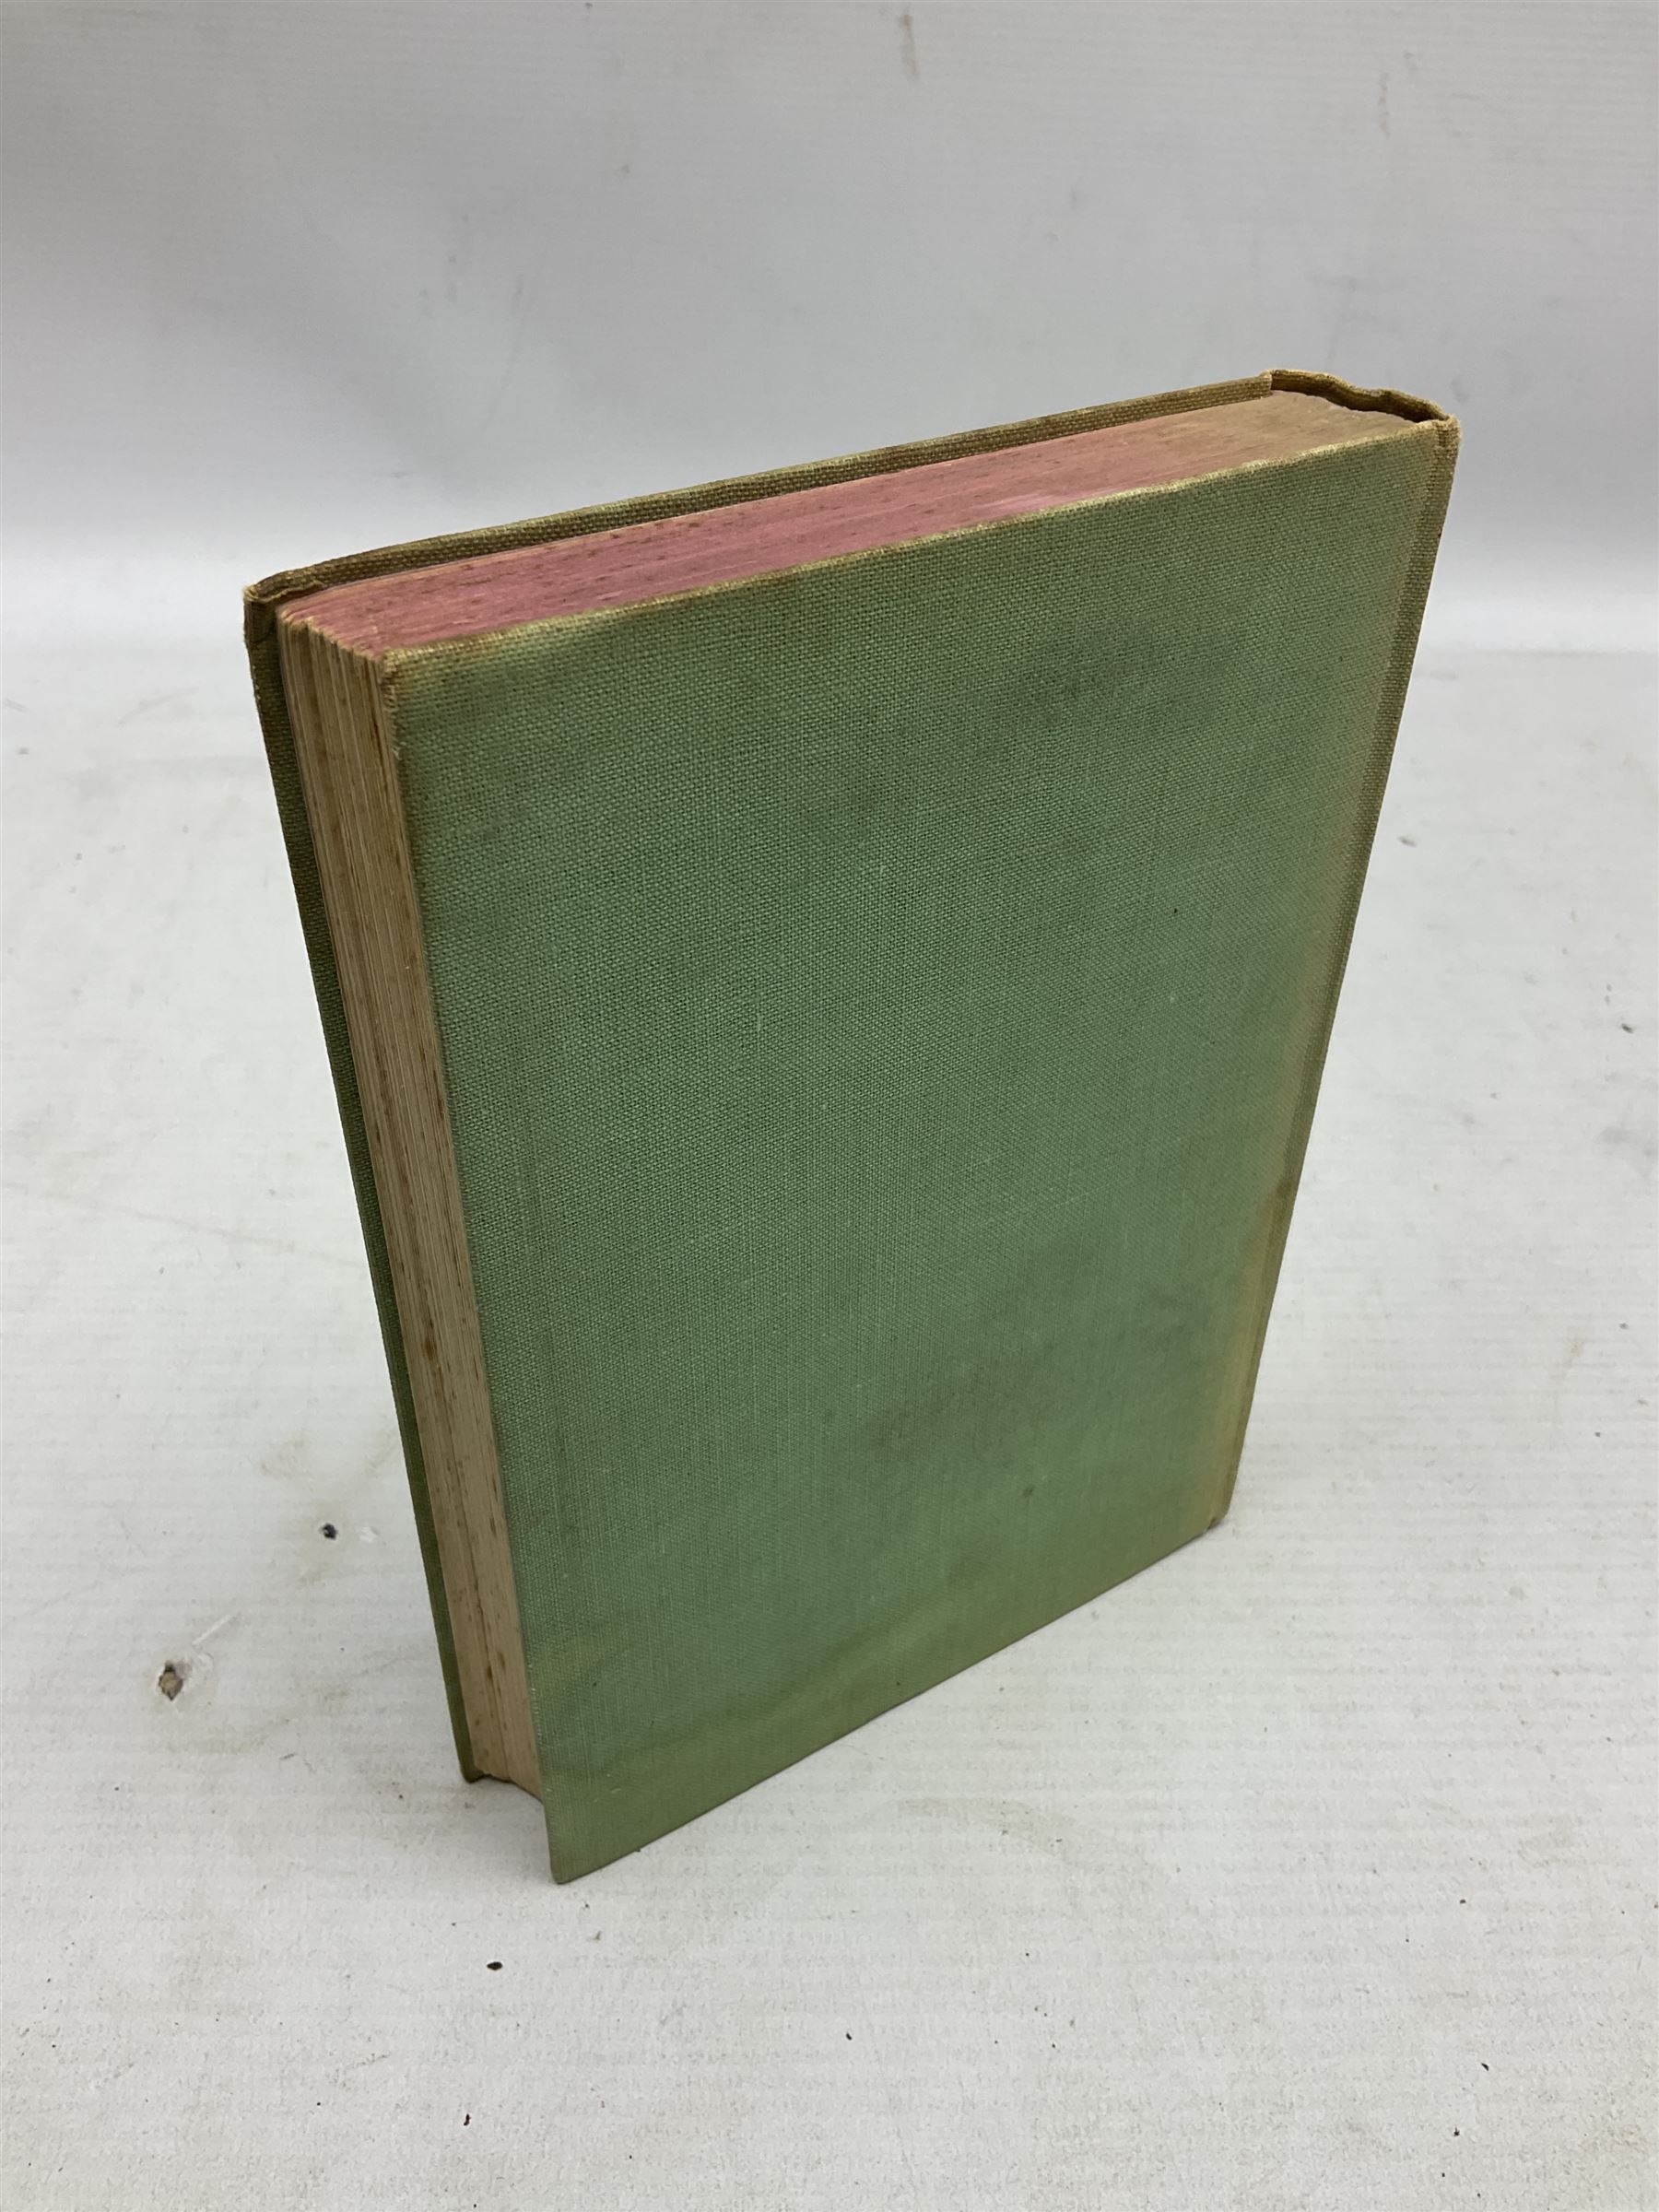 Orwell George: Nineteen eighty-four. 1949. First edition. Secker & Warburg. Green cloth binding. - Image 2 of 9